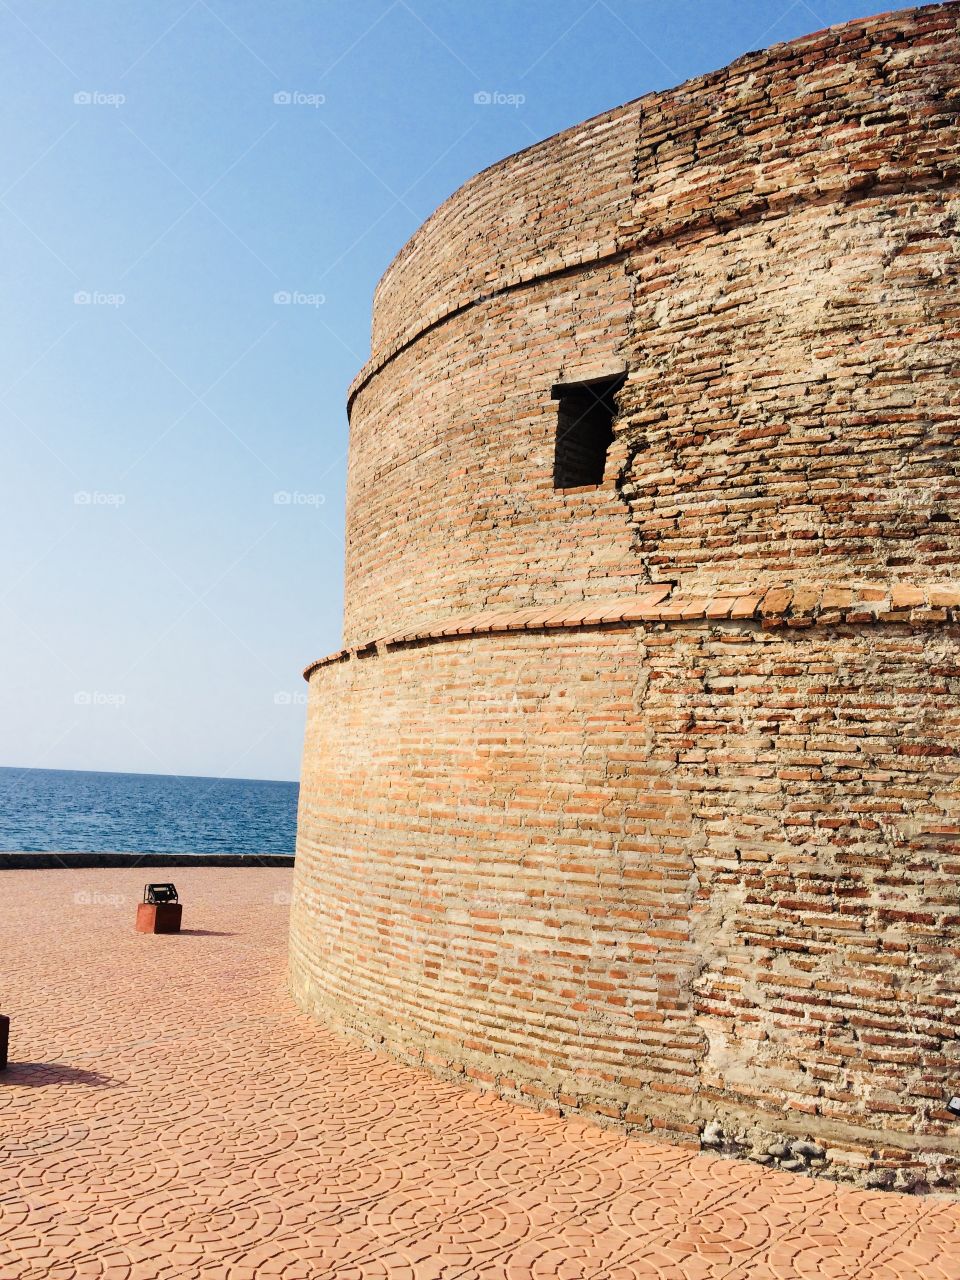 the historical tower along the beautiful sight of the ocean.